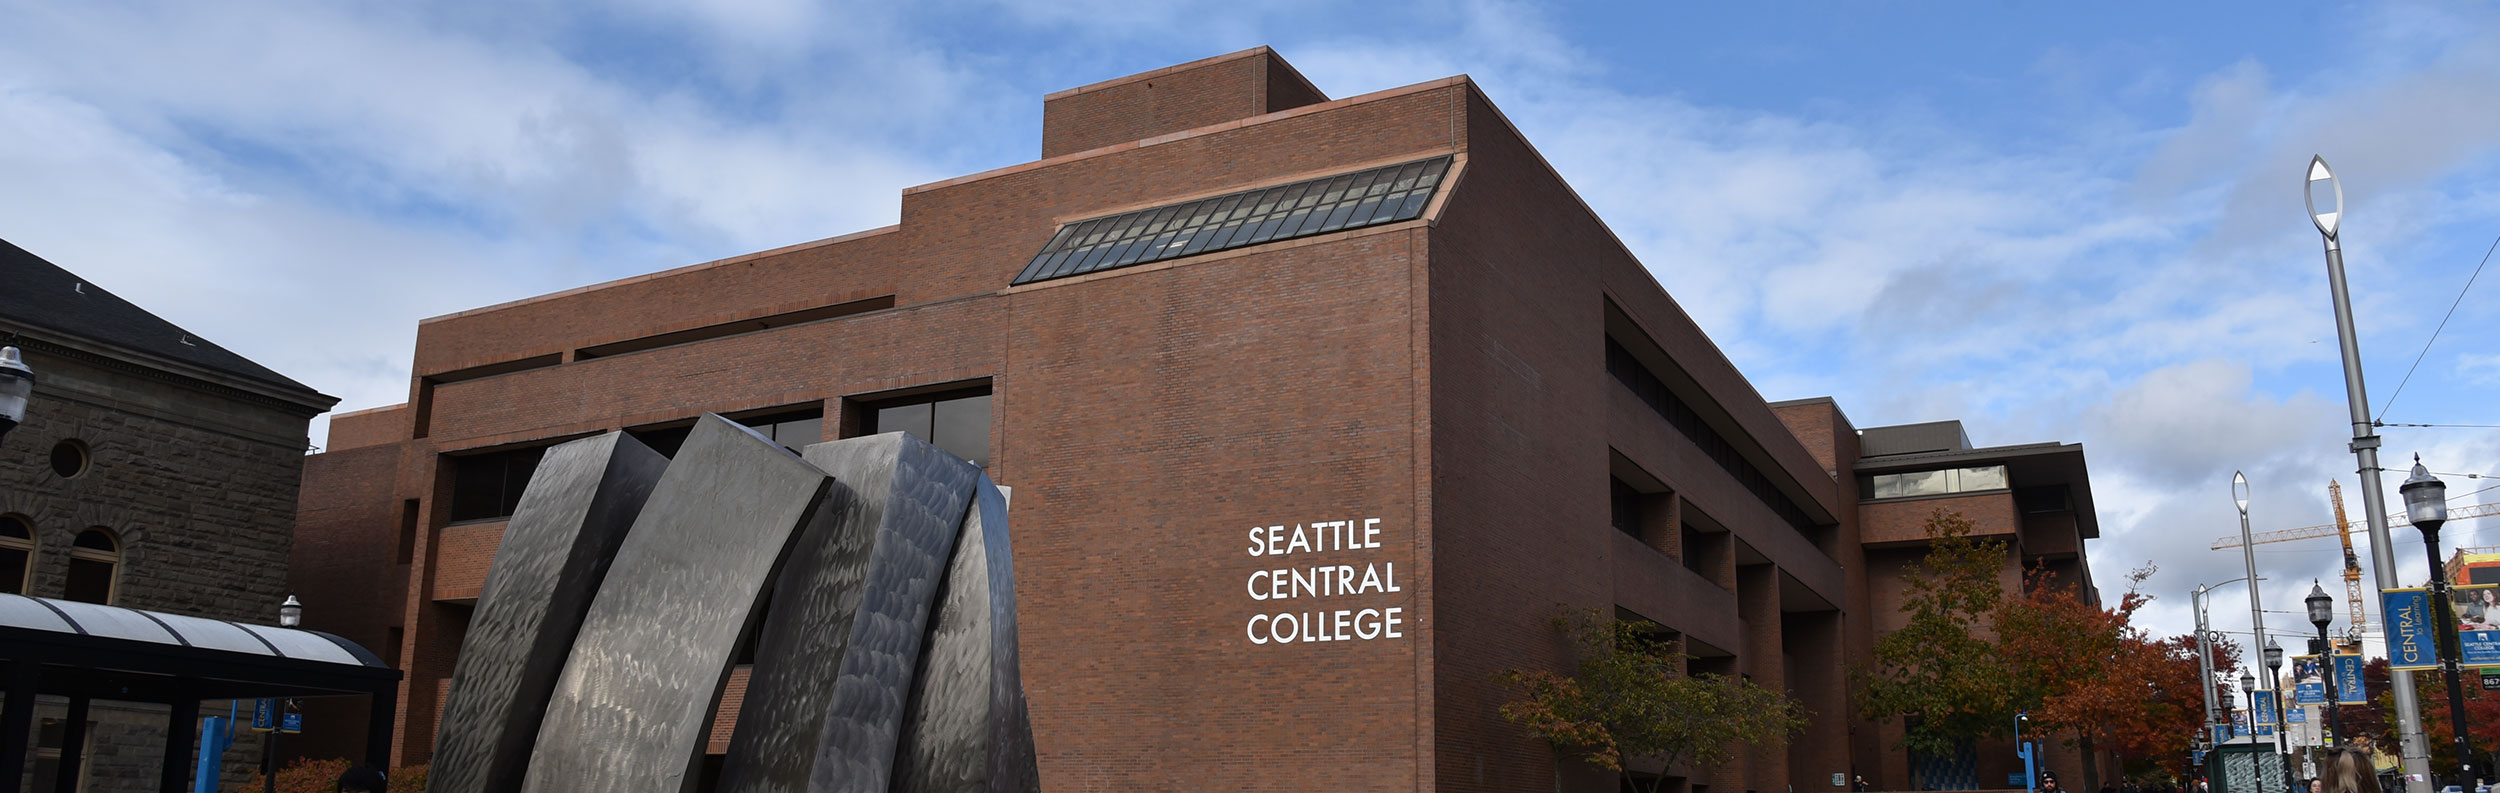  Seattle Central College Broadway campus 